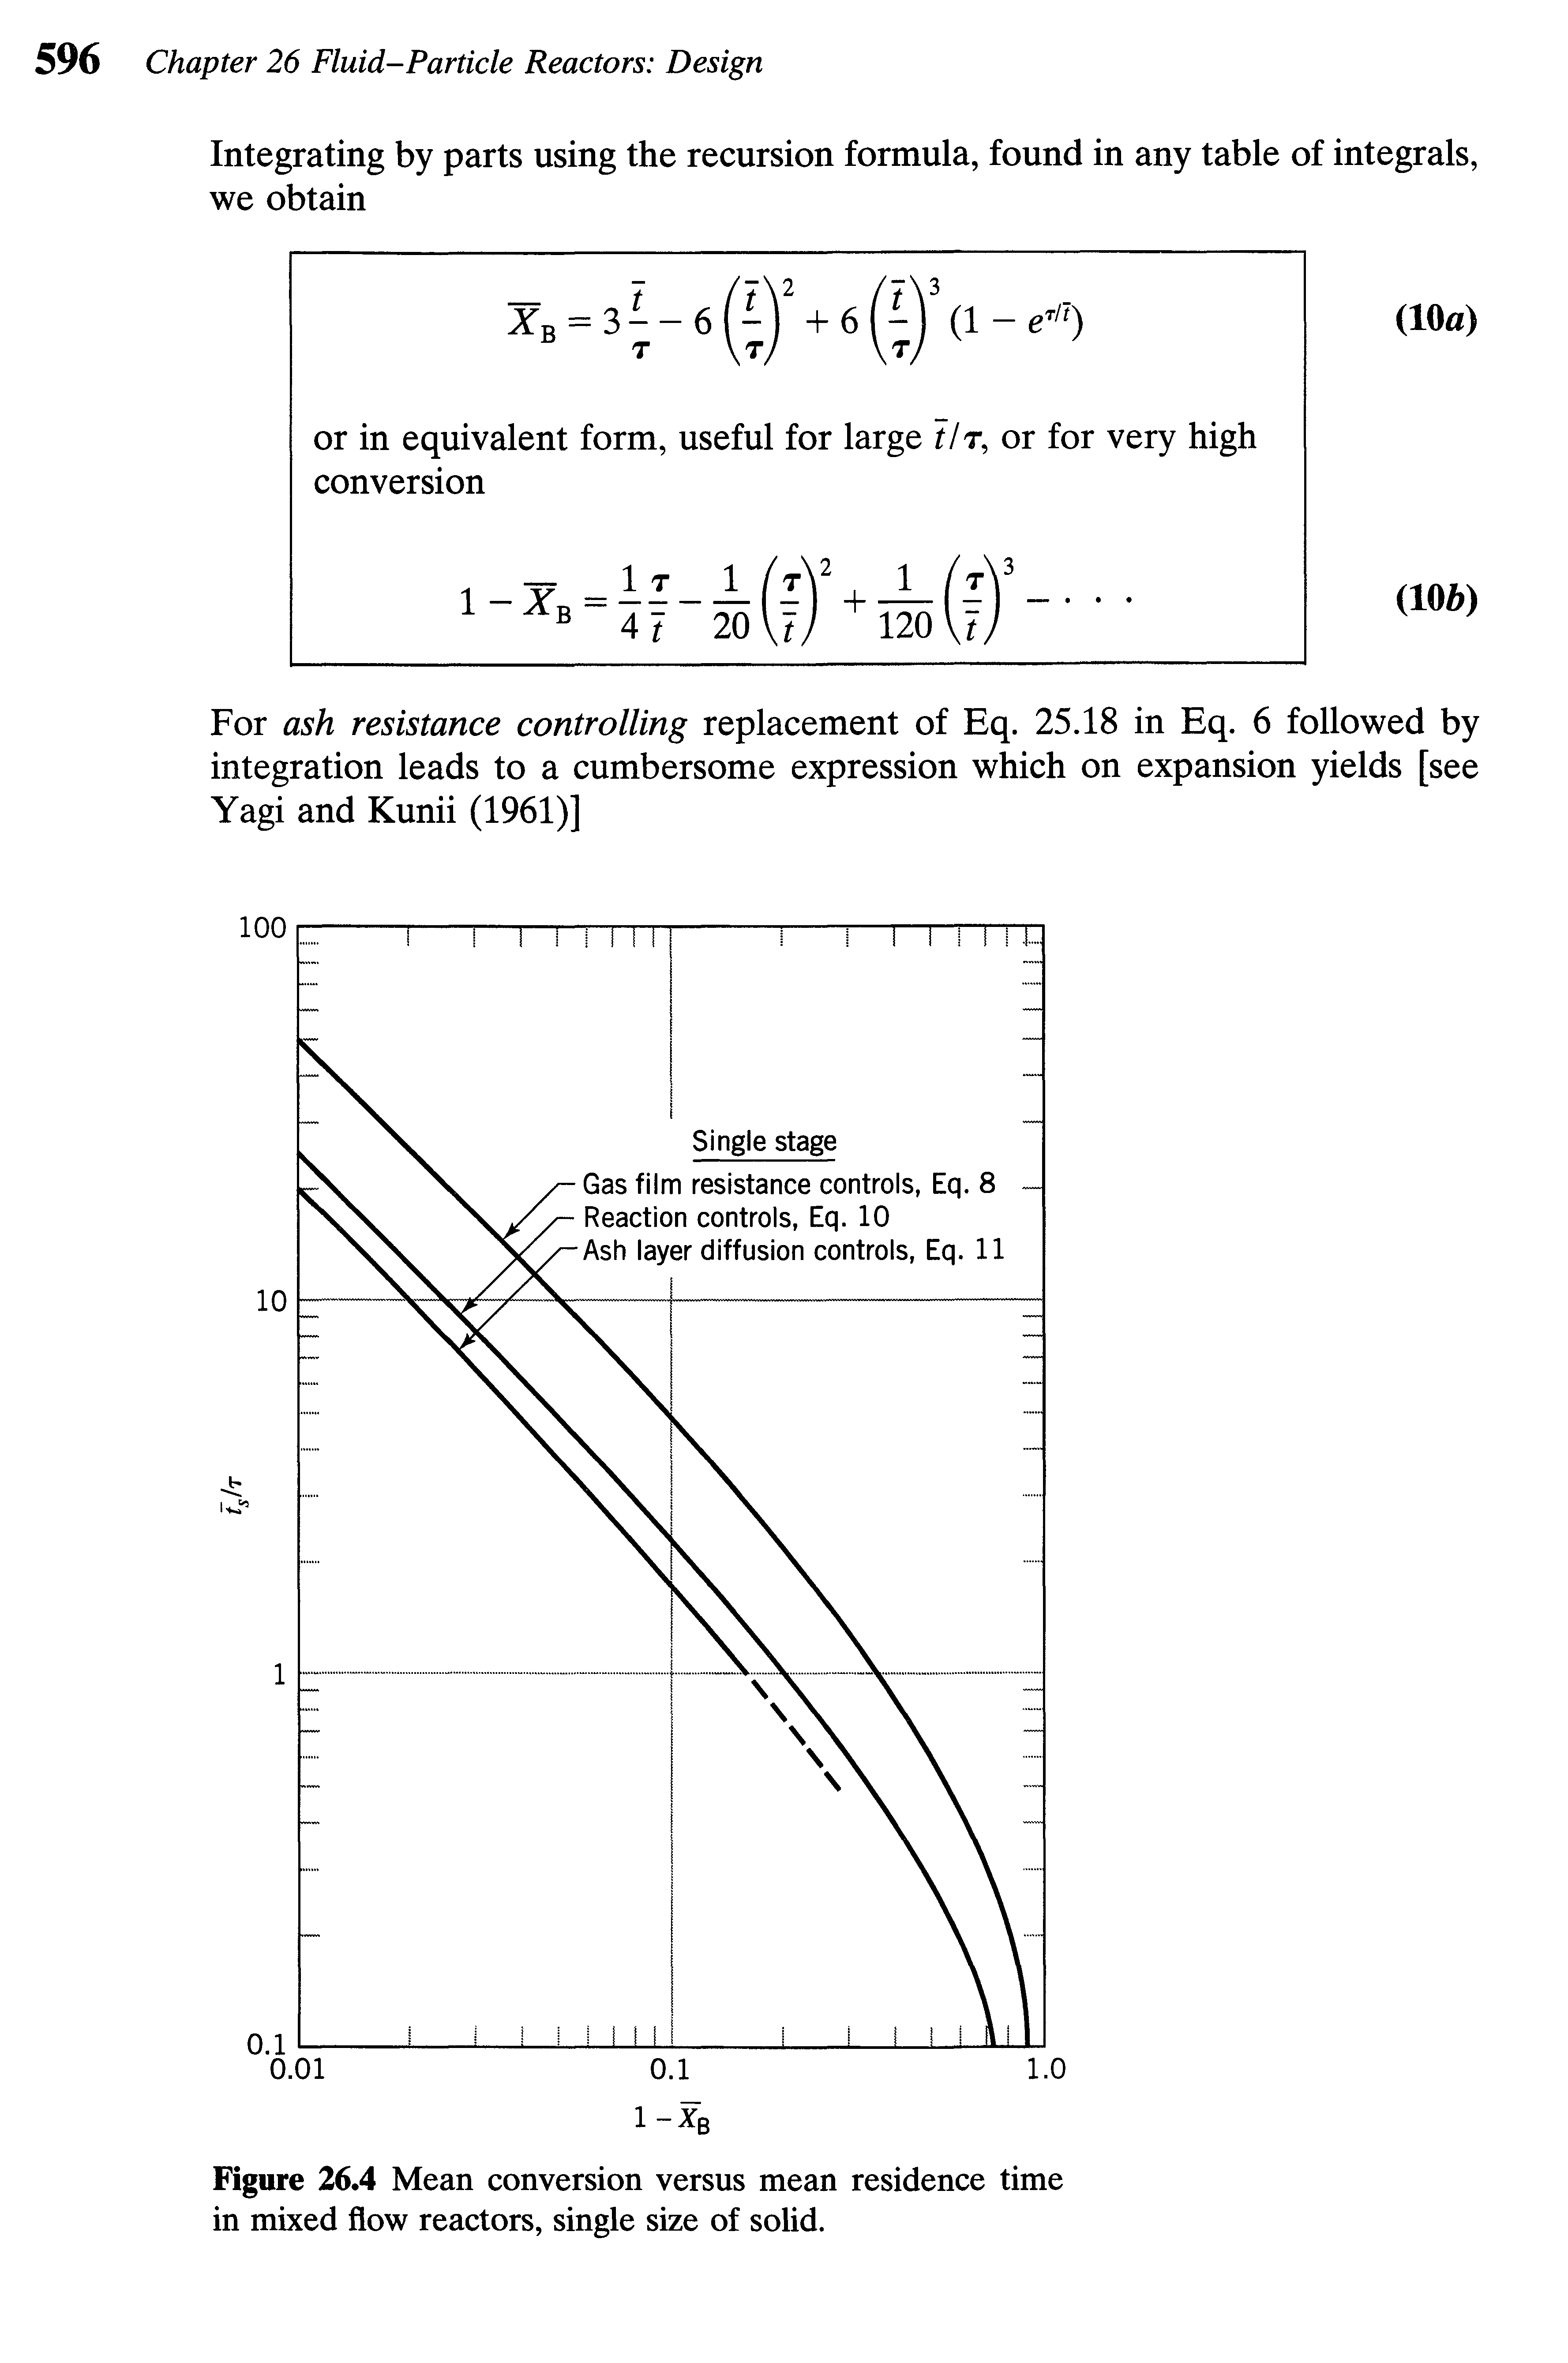 Figure 26.4 Mean conversion versus mean residence time in mixed flow reactors, single size of solid.